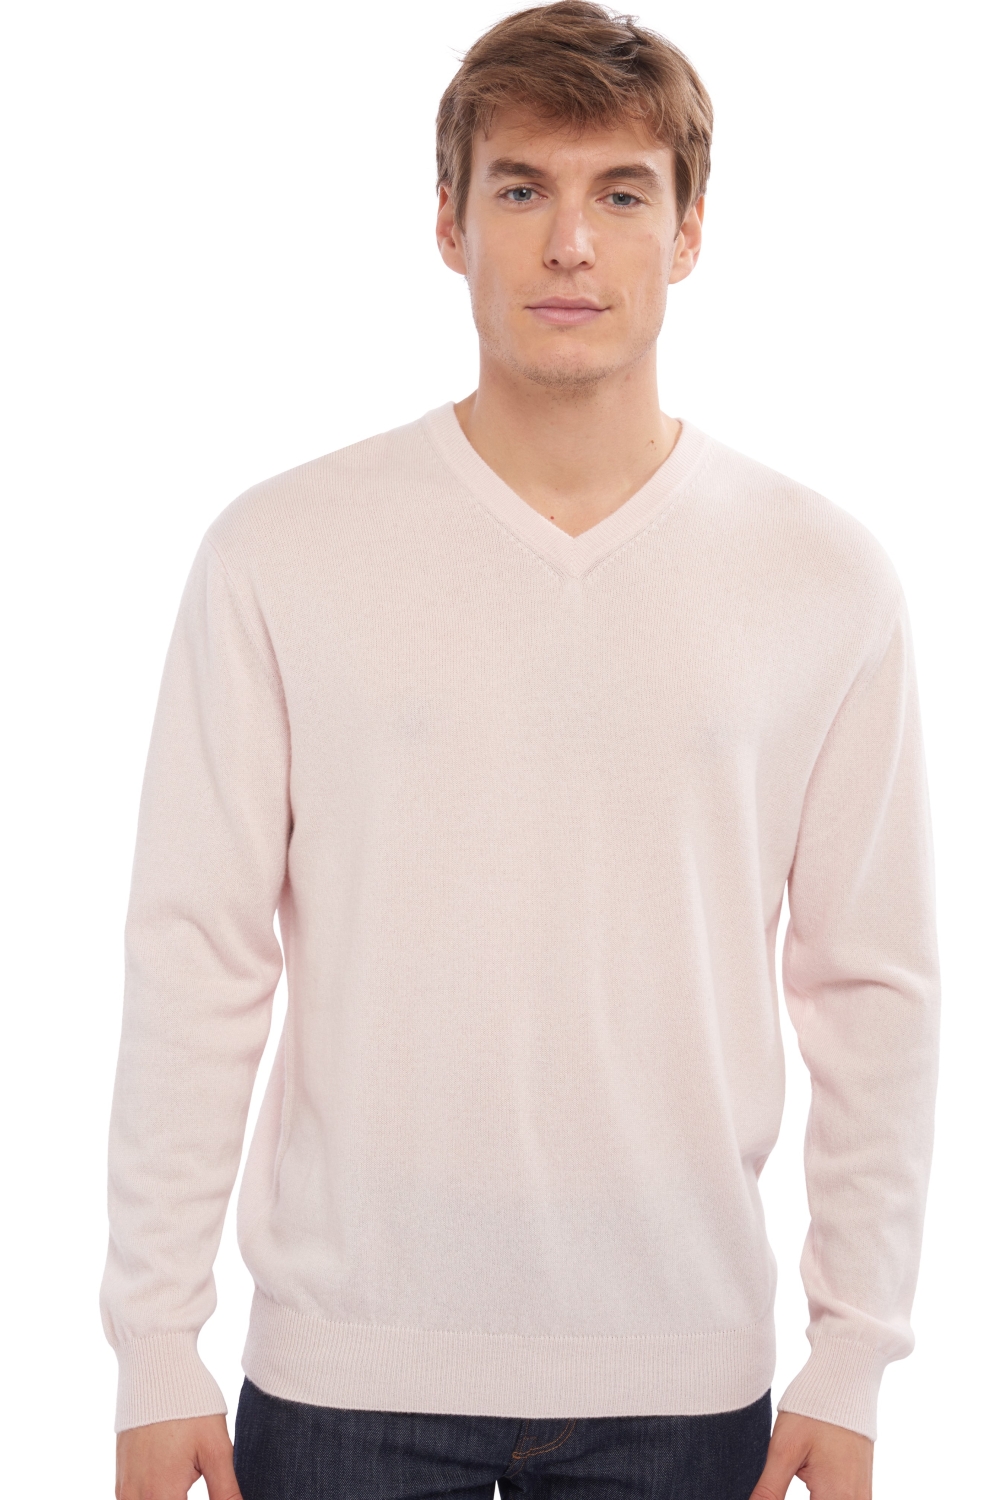 Cachemire pull homme gaspard rose pale 4xl